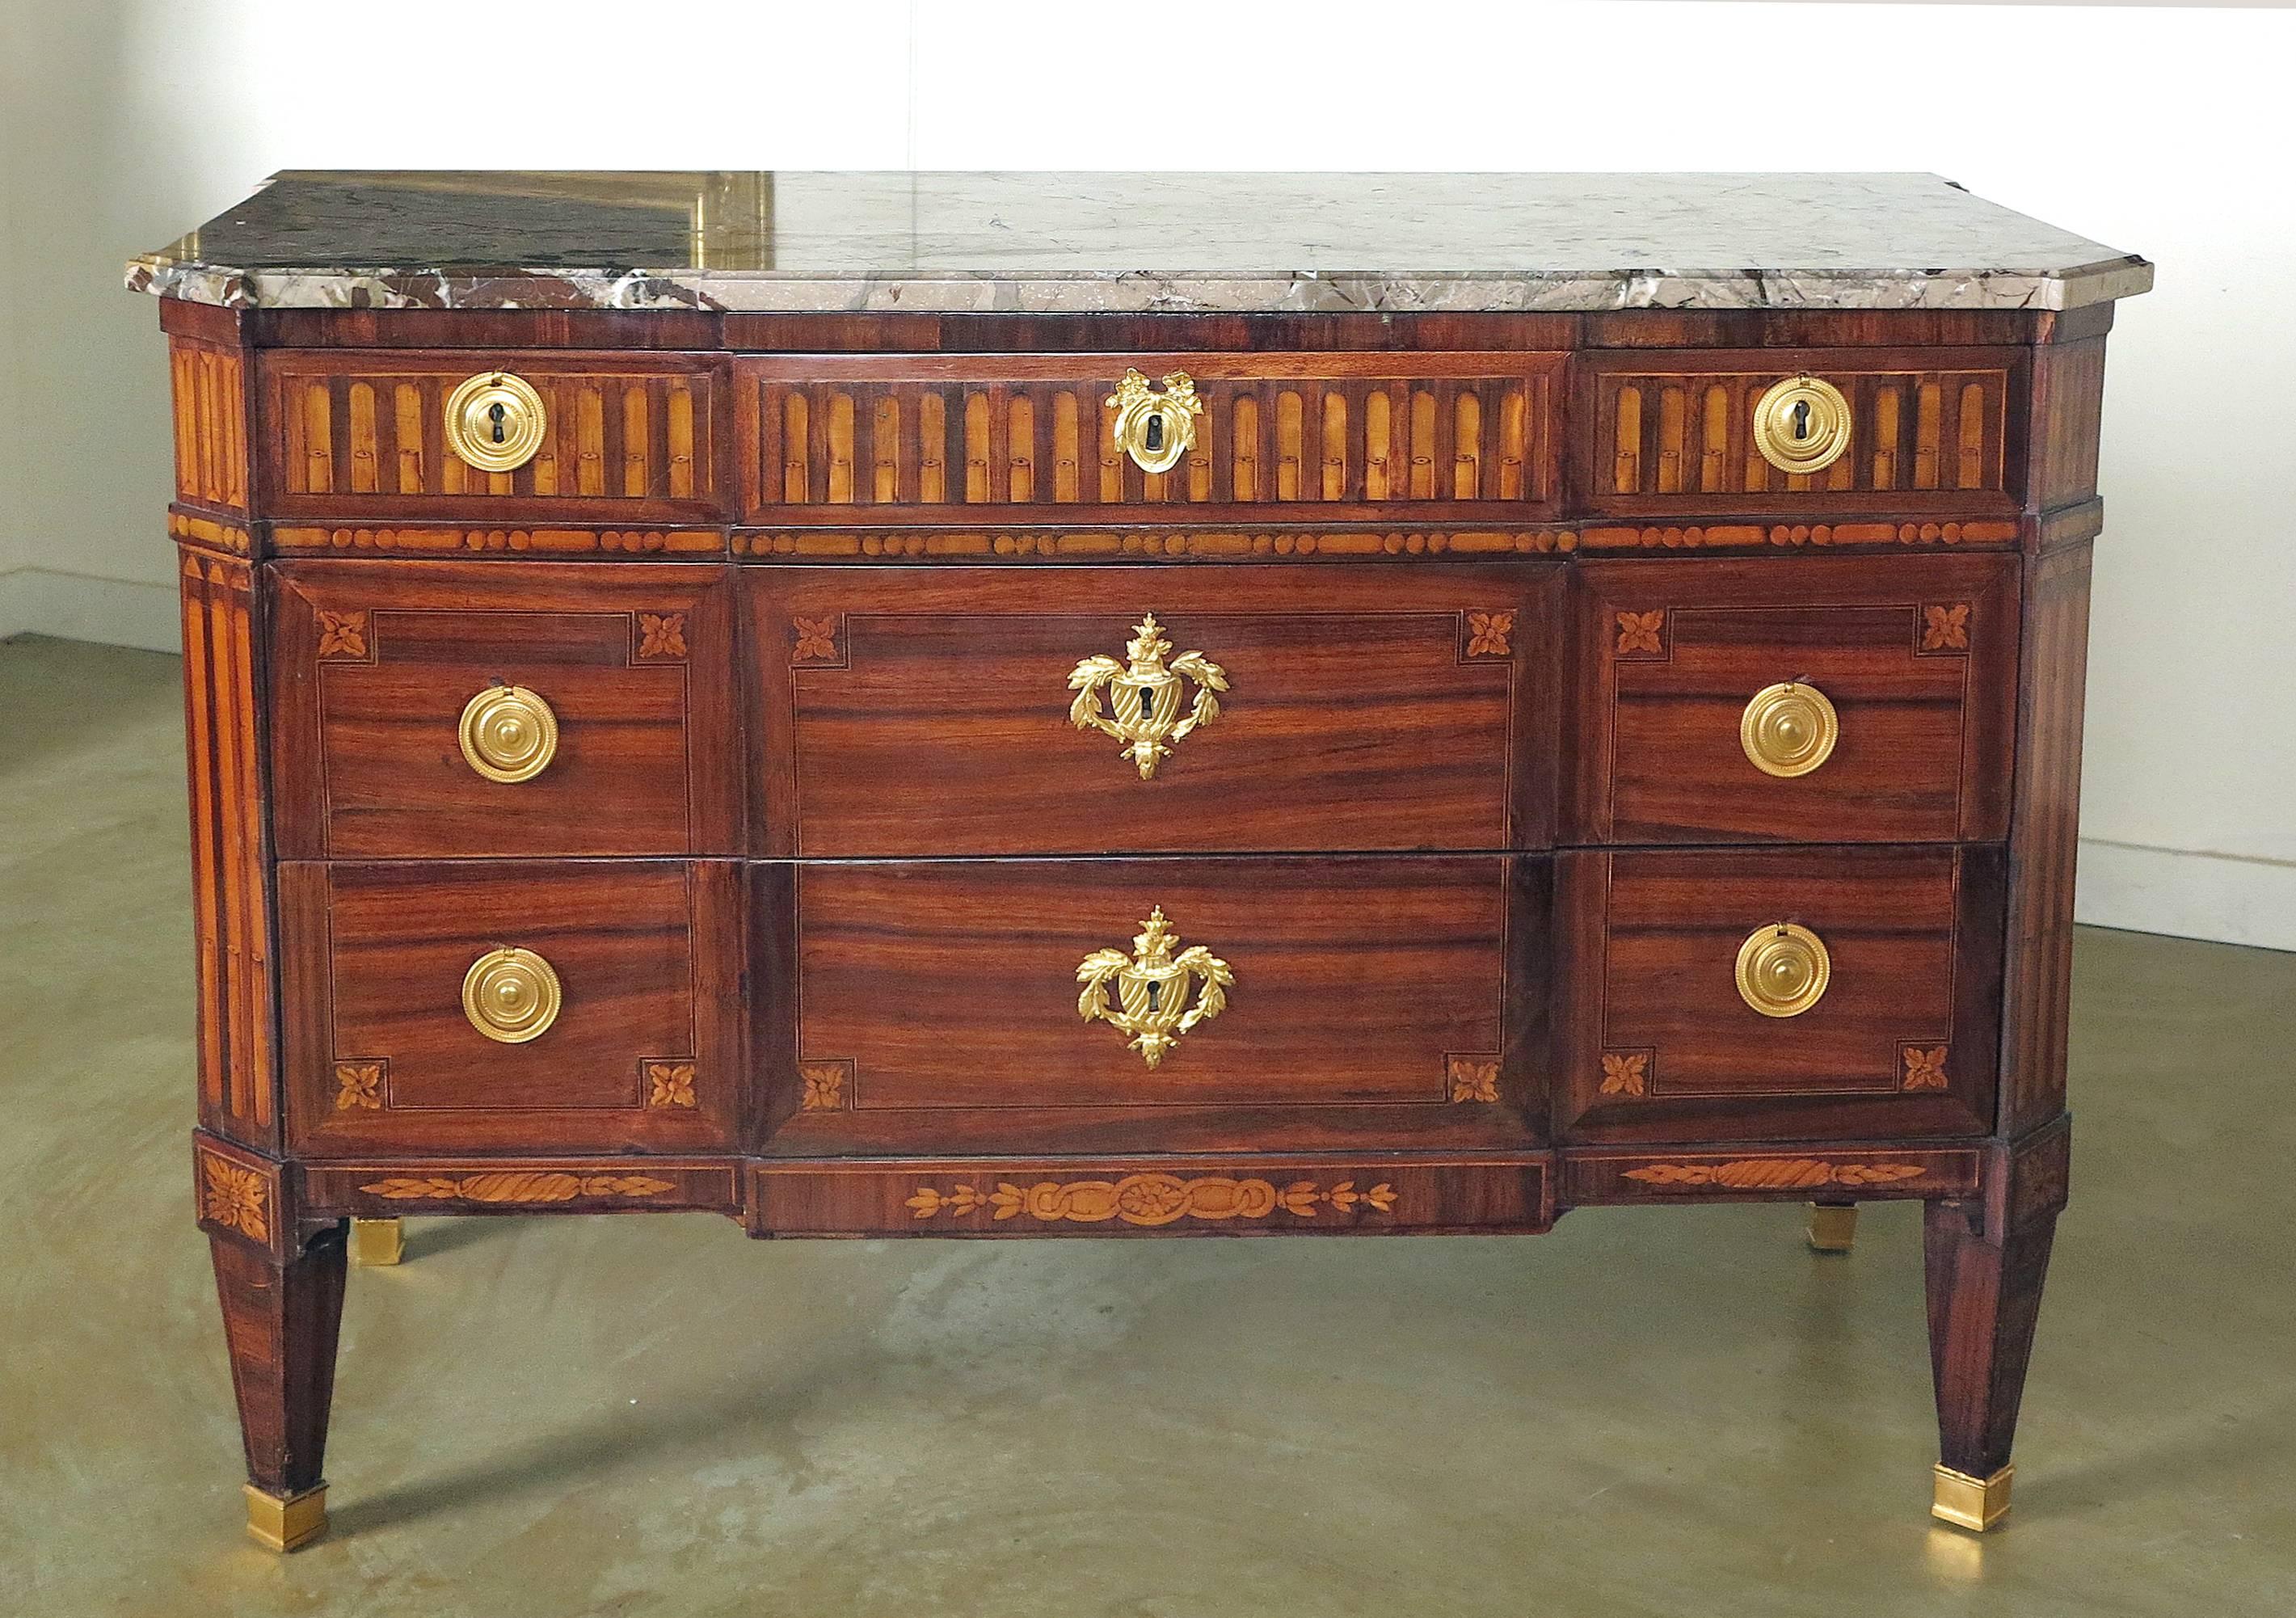 A Fine Louis XVI Kingwood with Tulipwood & Purplewood Inlaid Commode by Crepi In Excellent Condition For Sale In Sheffield, MA